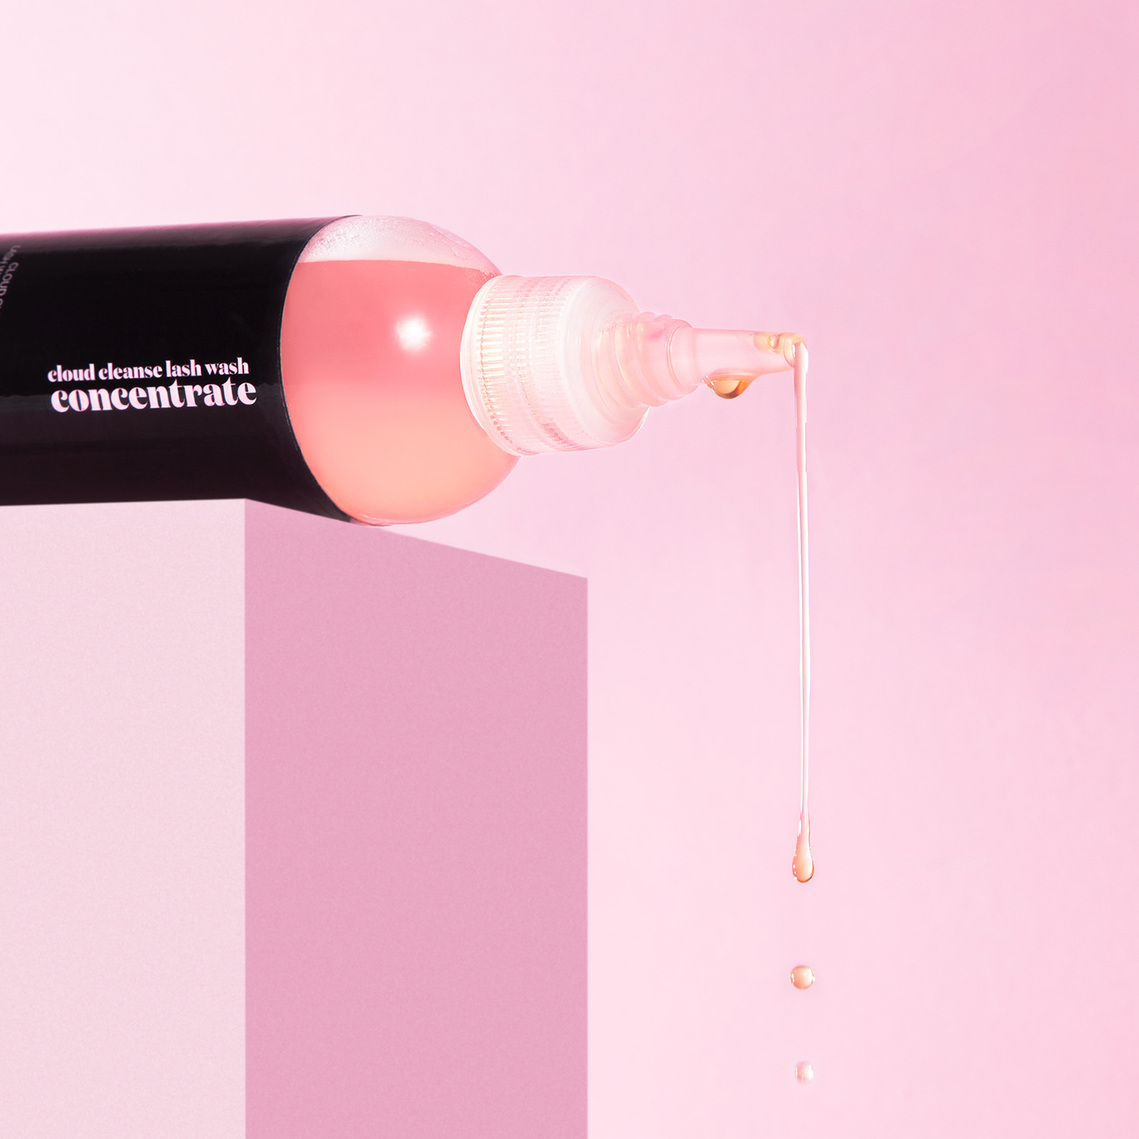 JB Lashes Pro Cloud Cleanse Concentrate Wash on pink background with drip coming out of tip of bottle on a pink platform close up product photography prop styling by photographer stylist Becca M los angeles